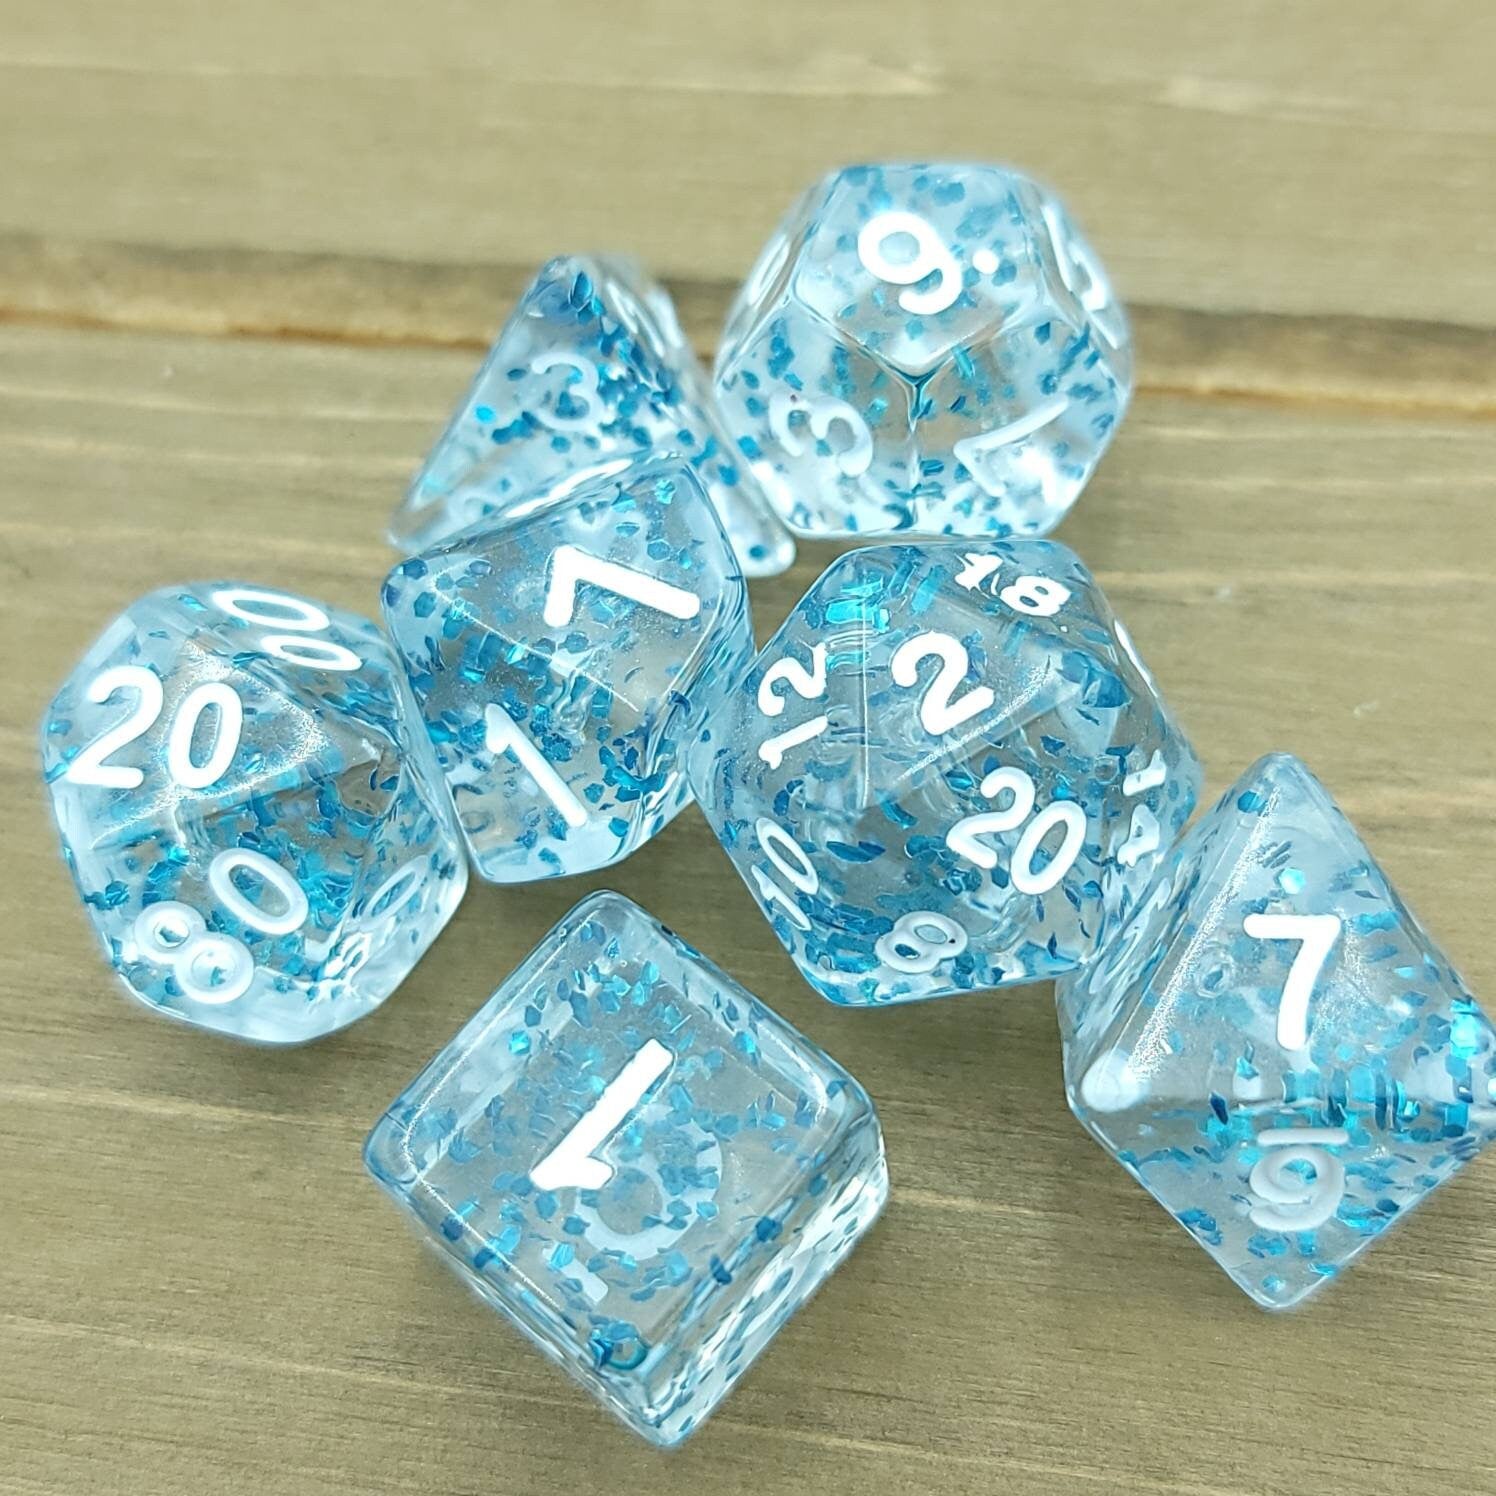 Blue Confetti | RPG Dice Set| RPG Dice | Polyhedral Dice Set | Dungeons and Dragons | DnD Dice Set | Gaming Dice Set